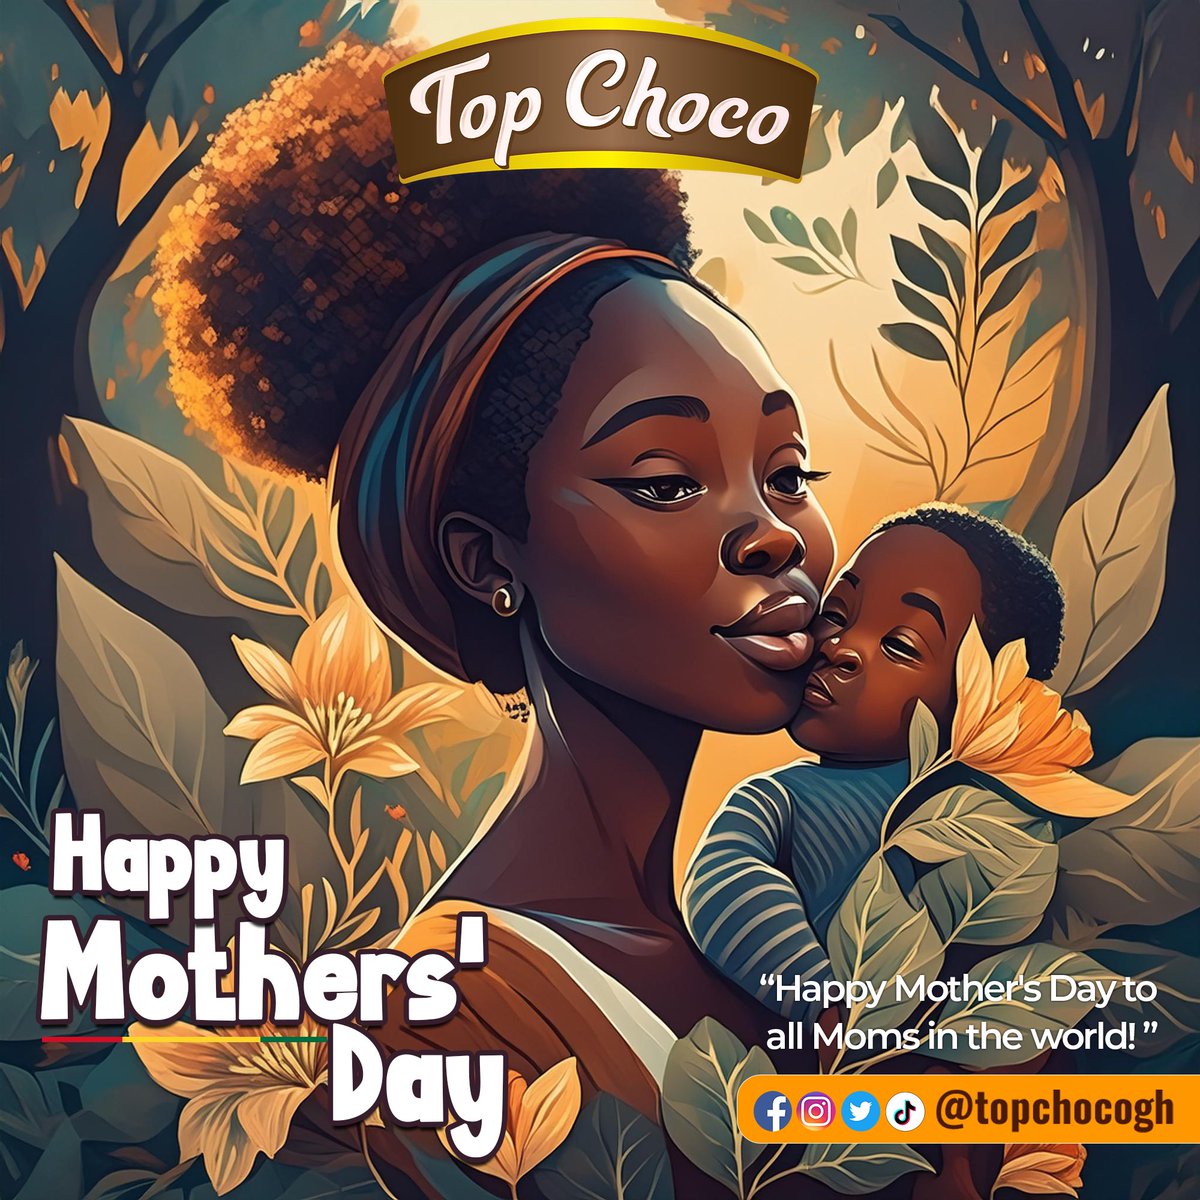 🟡🟤: Celebrating the extraordinary love and endless sacrifices of mothers everywhere. Happy Mother's Day to the heartbeat of our lives. 🤎 #TasteTopChoco #motherhood #MothersDay